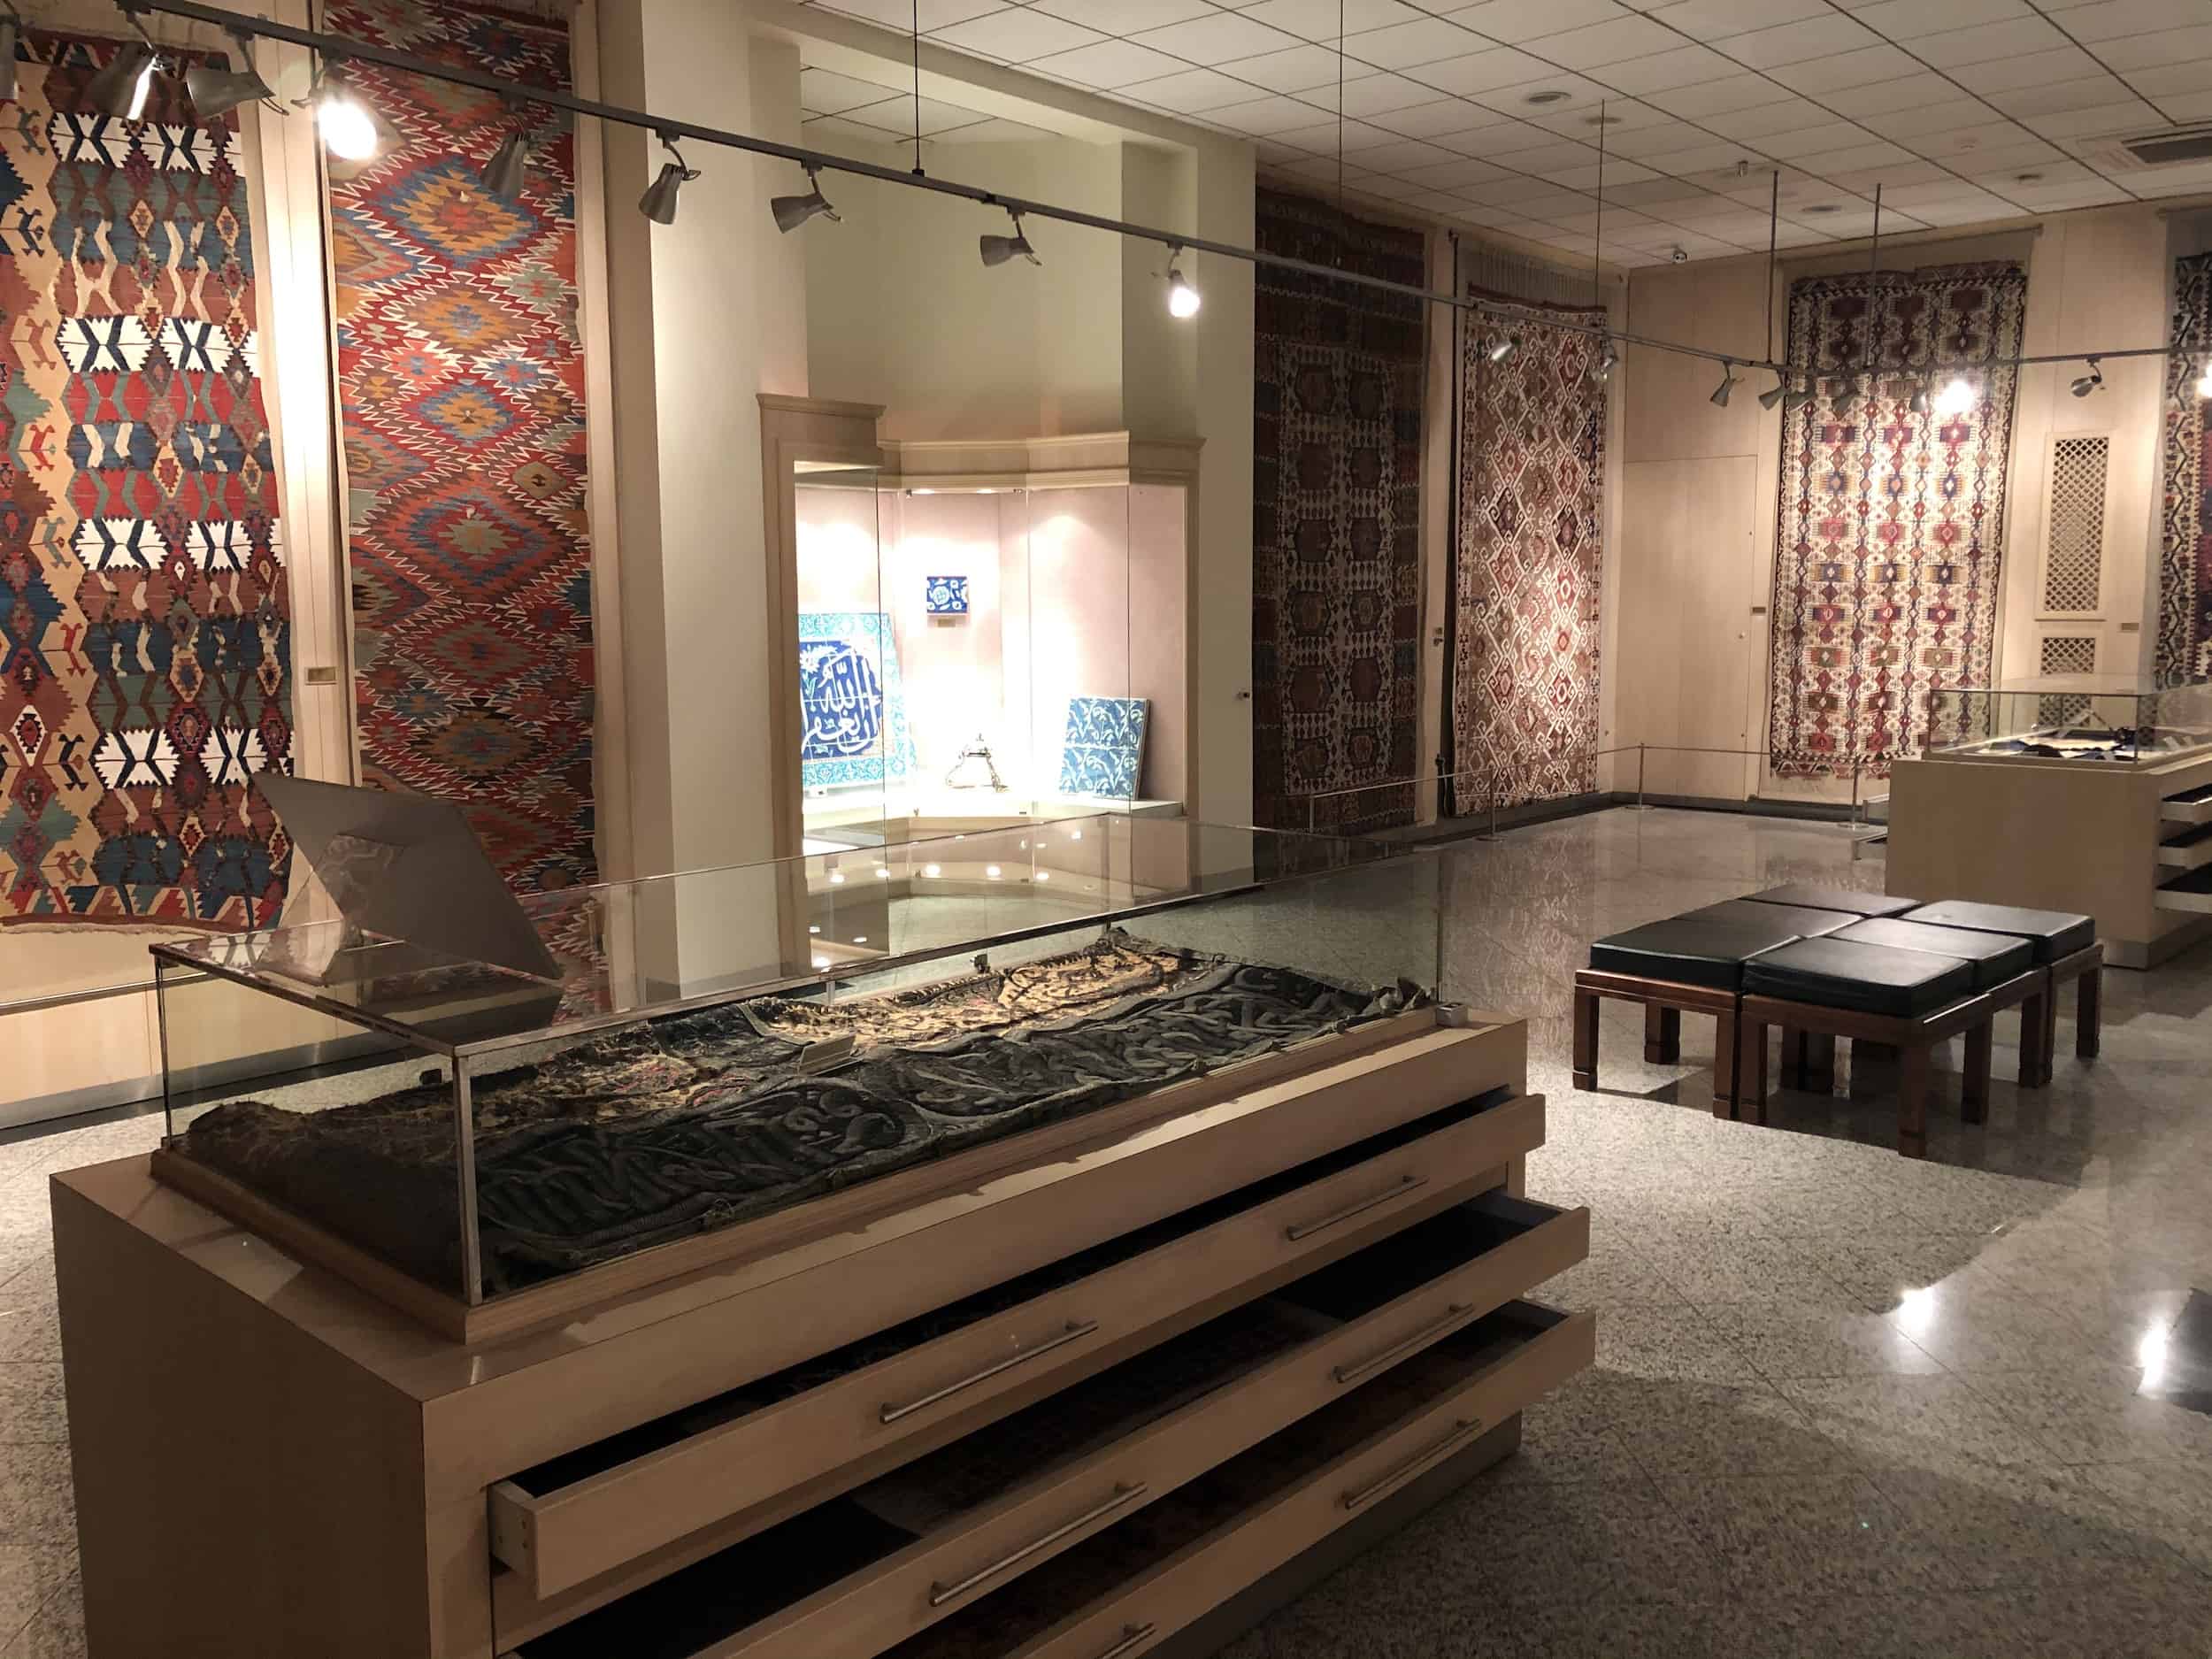 Ceramic tile and kilim gallery at the Foundation Works Museum in Ankara, Turkey